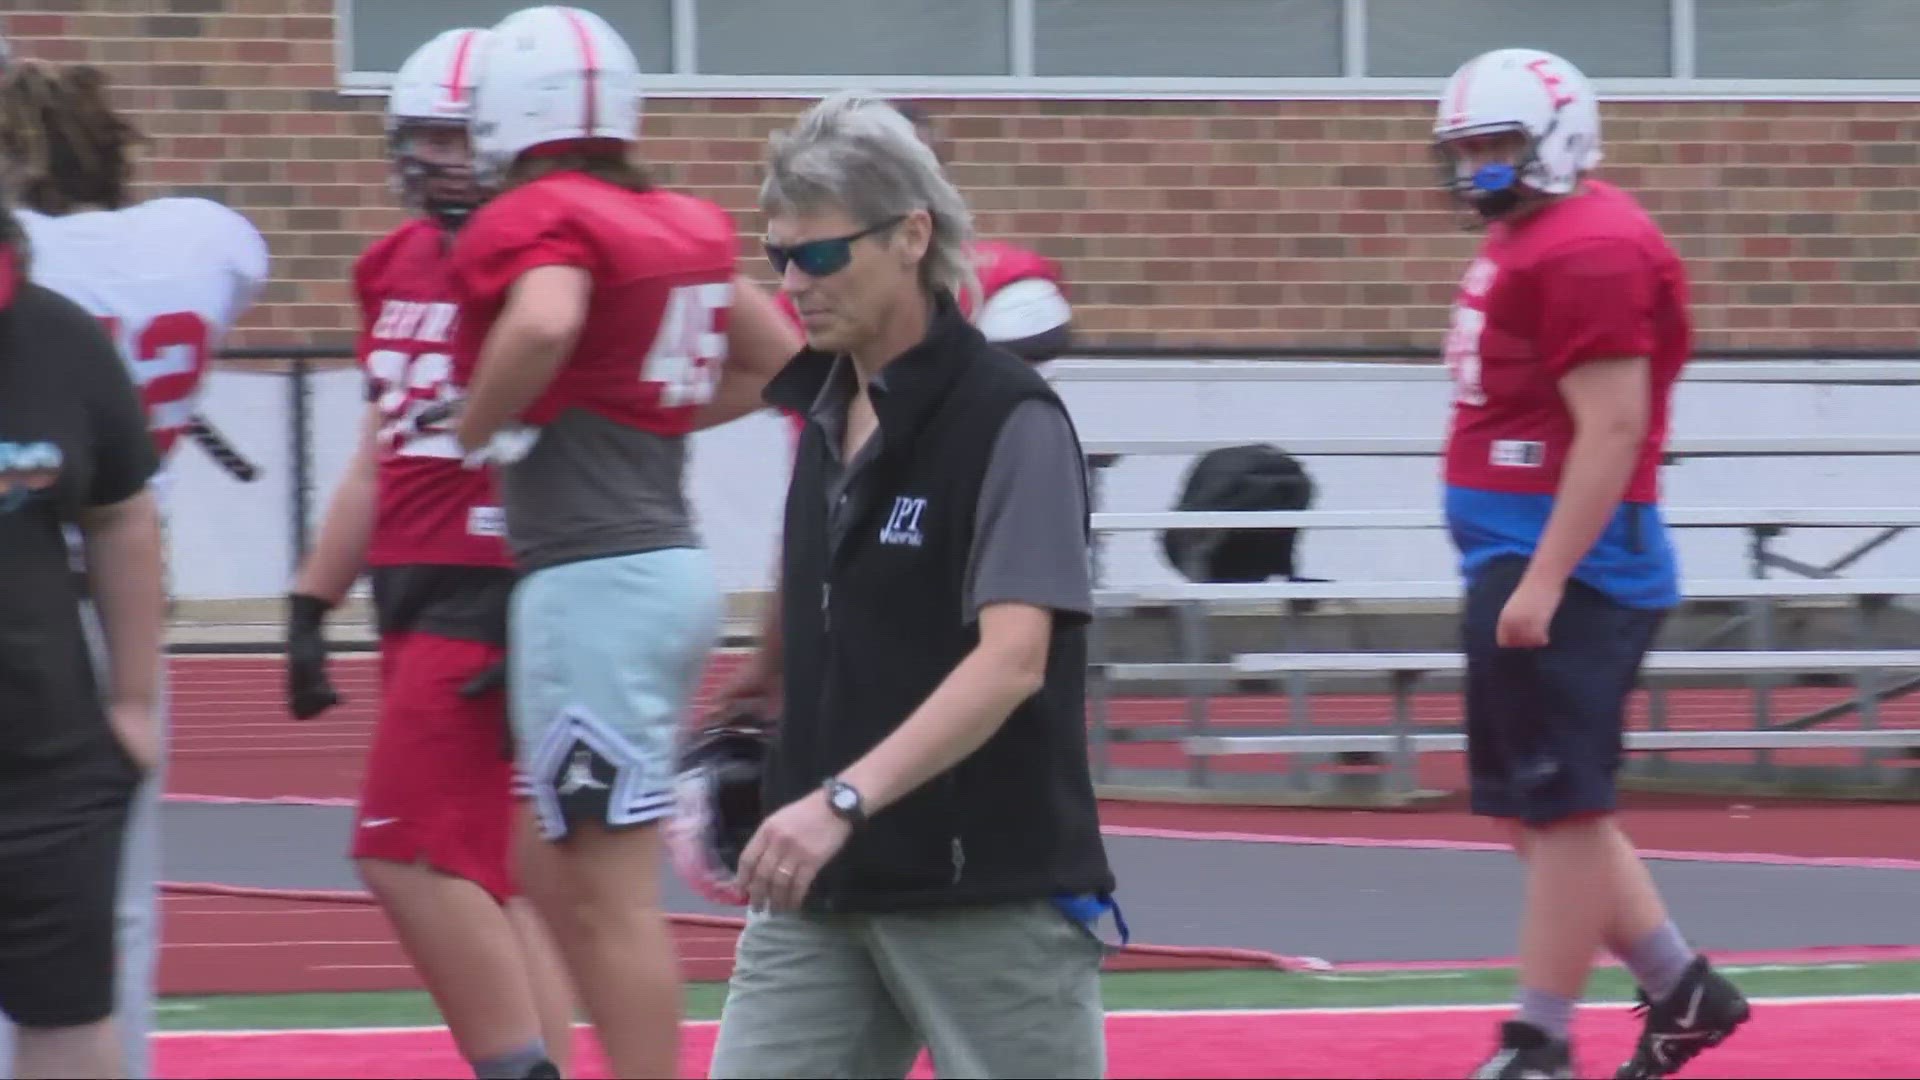 School athletic trainers across the state of Ohio are in short supply, but Elyria High School's team is working to help student-athletes reach new levels.